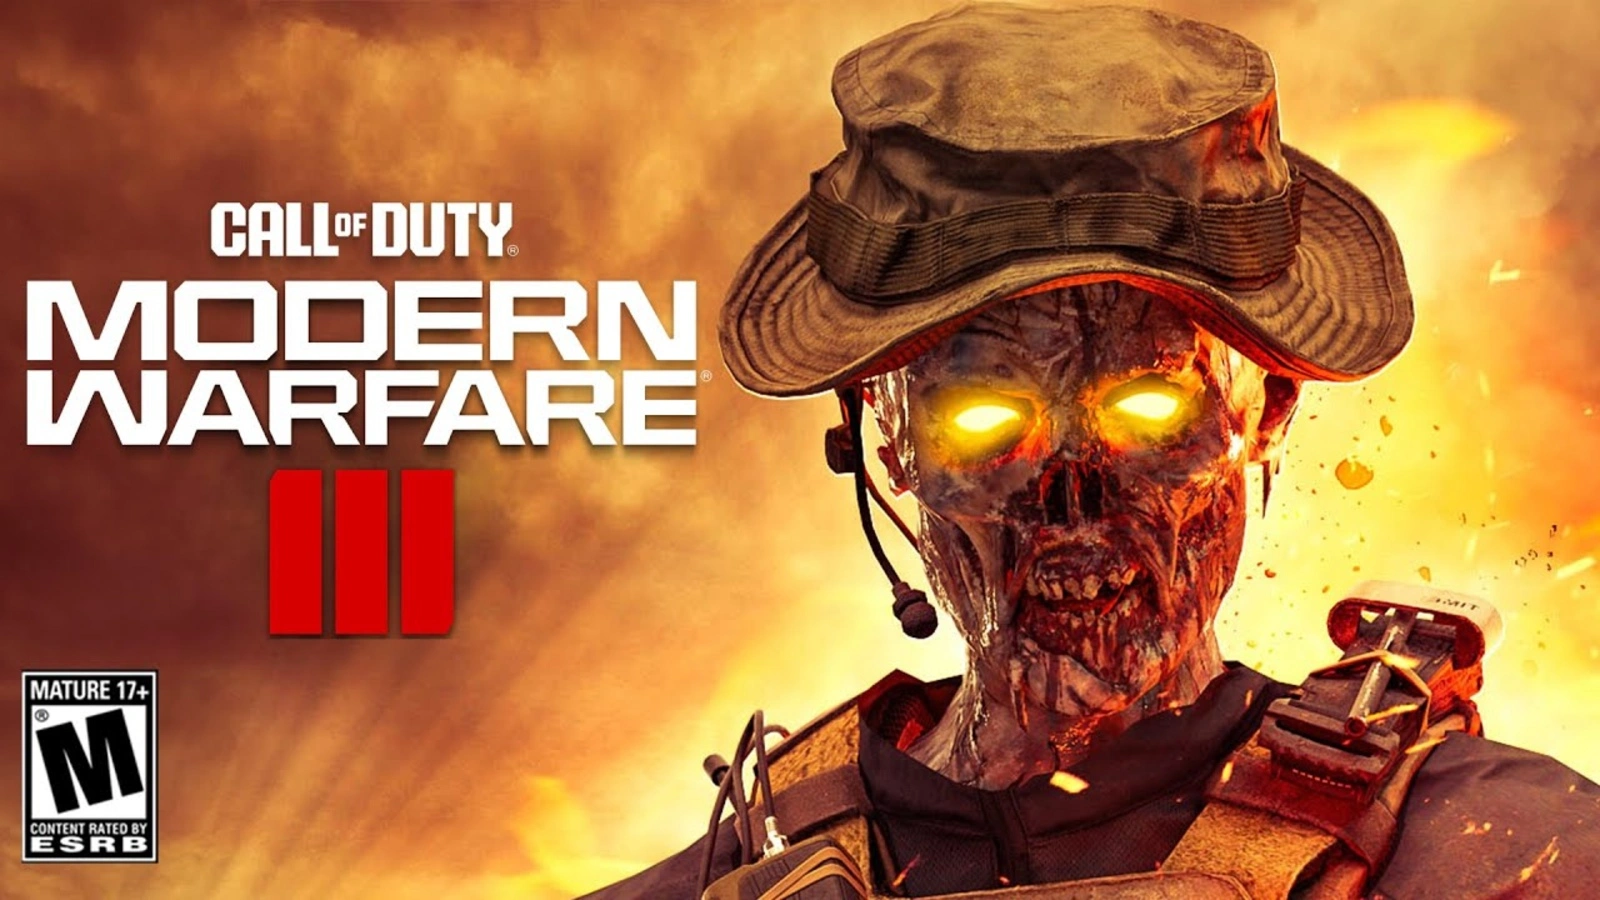 COD Modern Warfare III & Zombies ‘Underbarrel’ Attachment to the Pulemyot 762 LMG may cause 